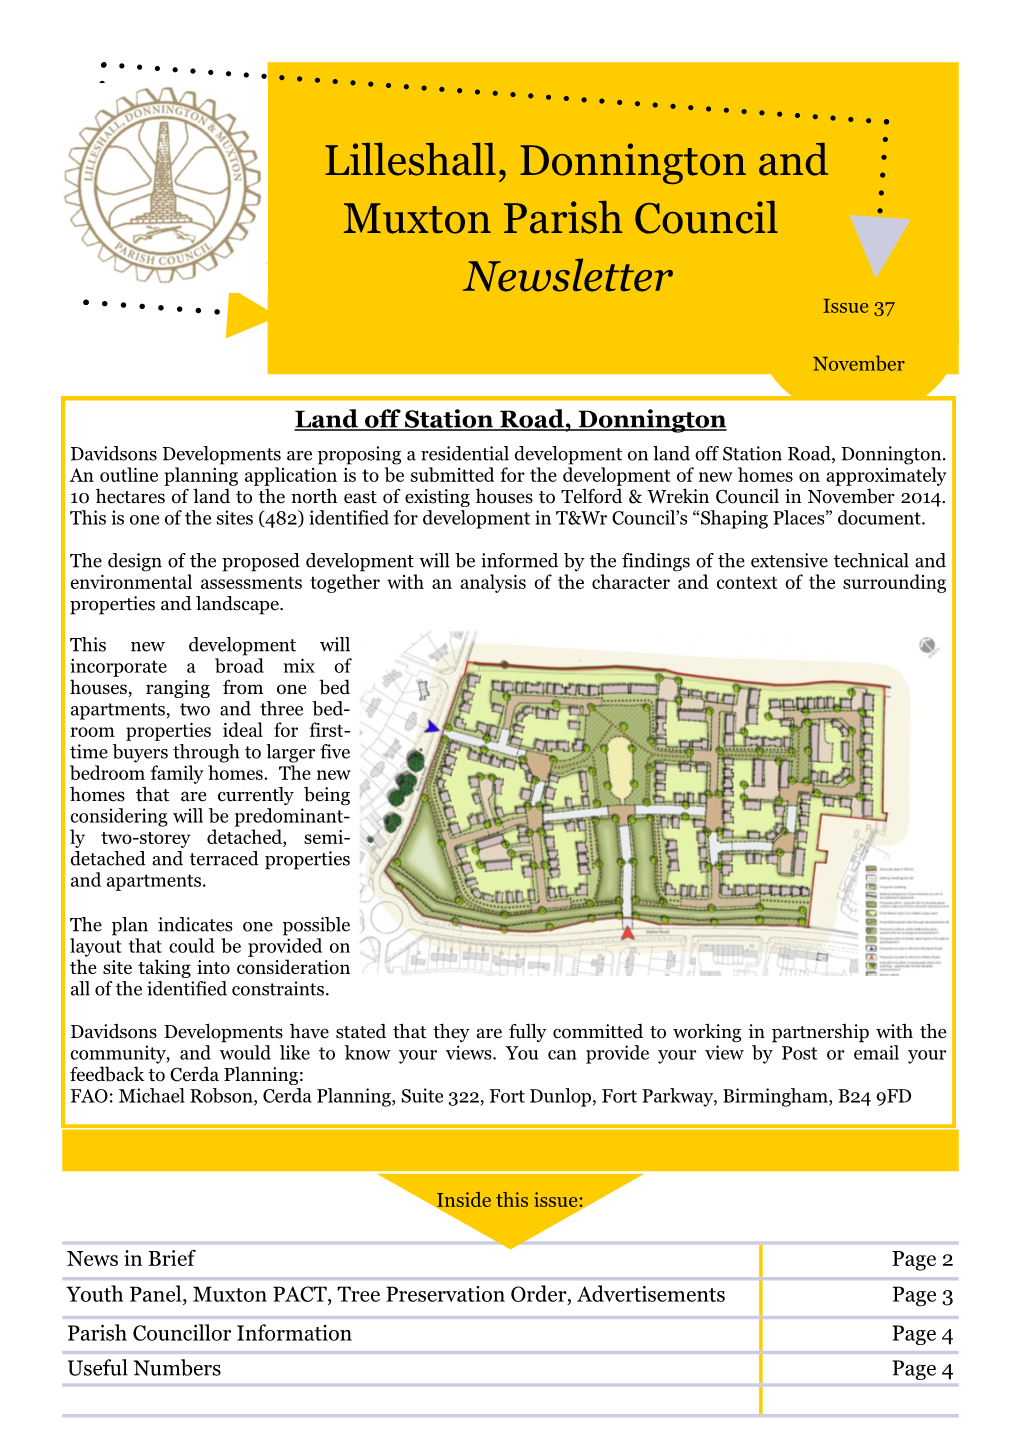 Lilleshall, Donnington and Muxton Parish Council Newsletter Issue 37